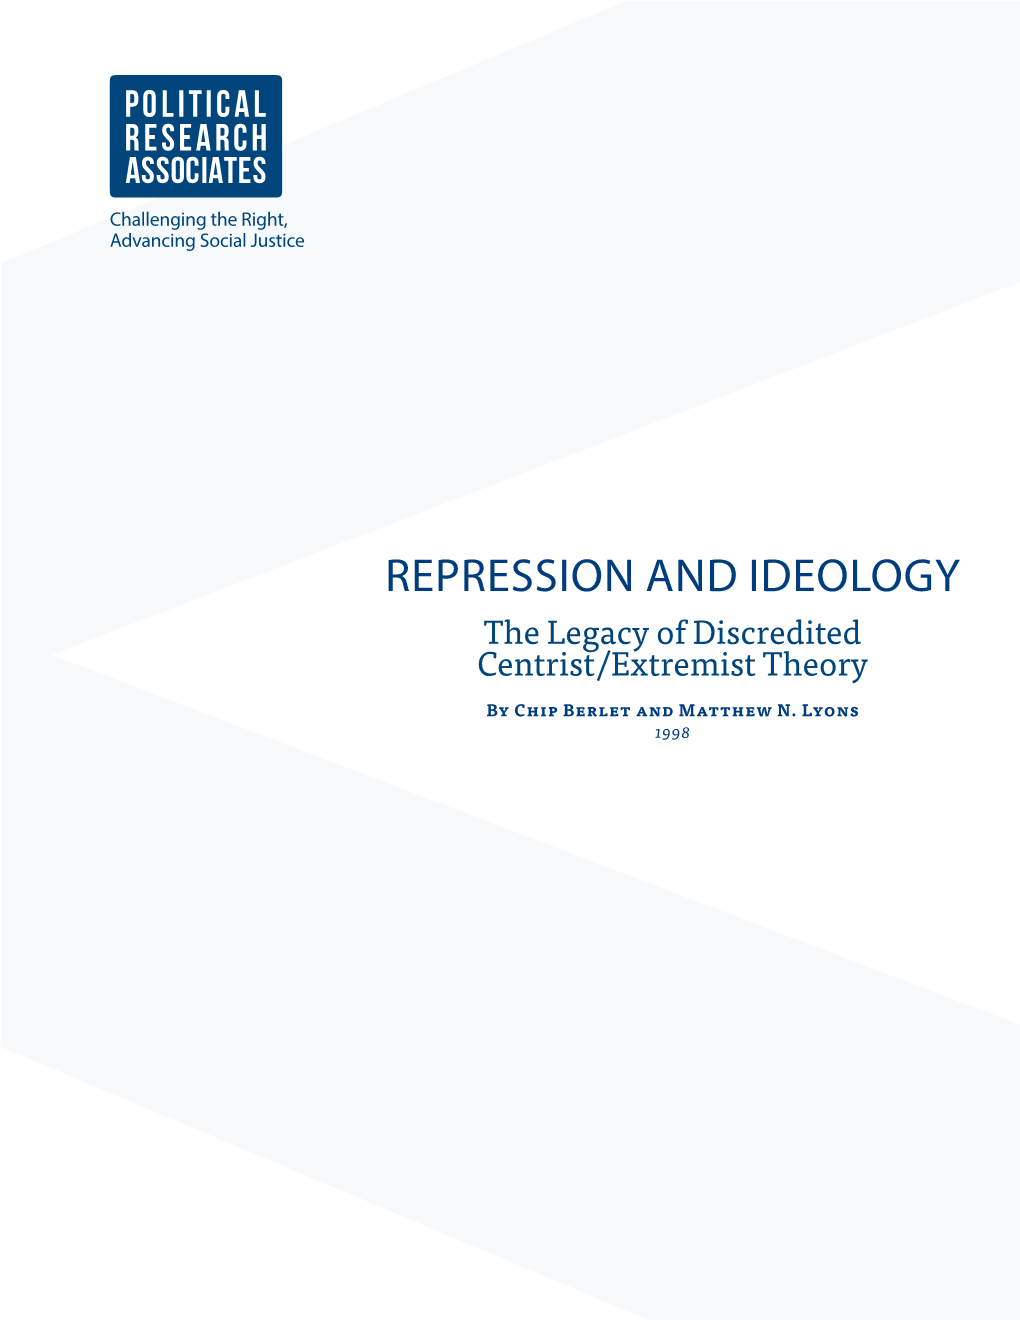 Repression and Ideology, Full Report